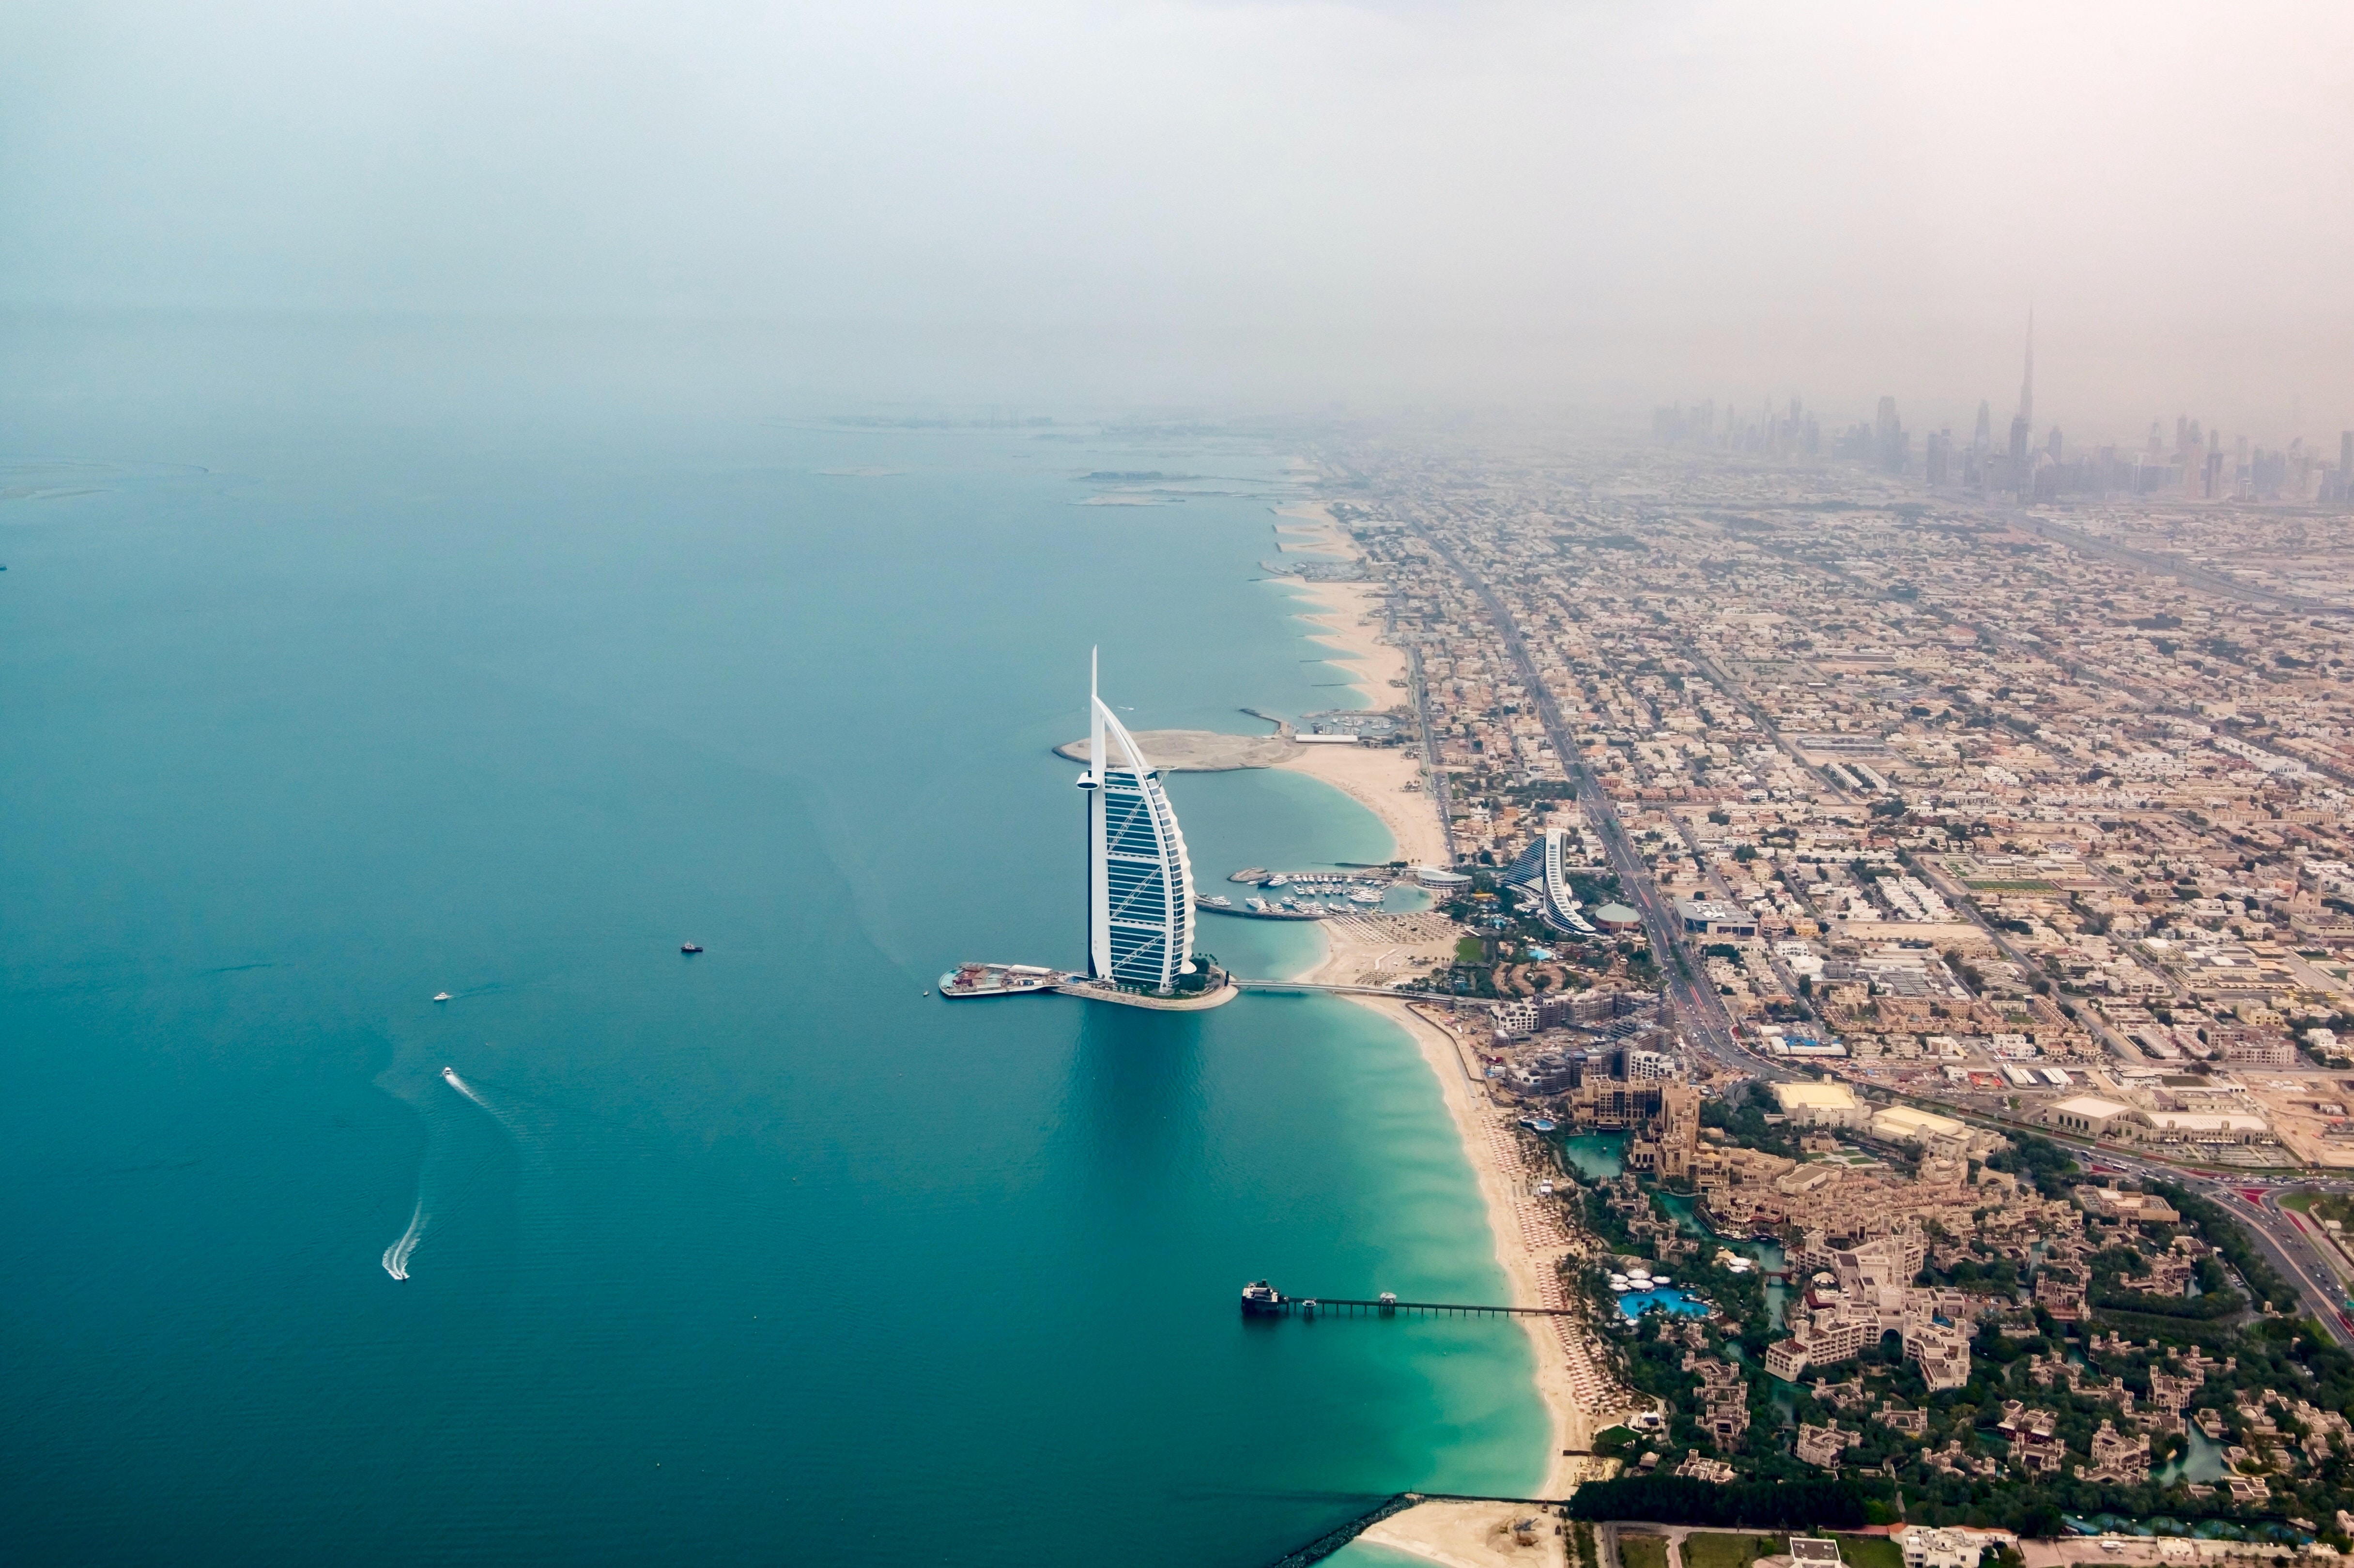 Dubai’s 10 Best Hotels and Transfer Times